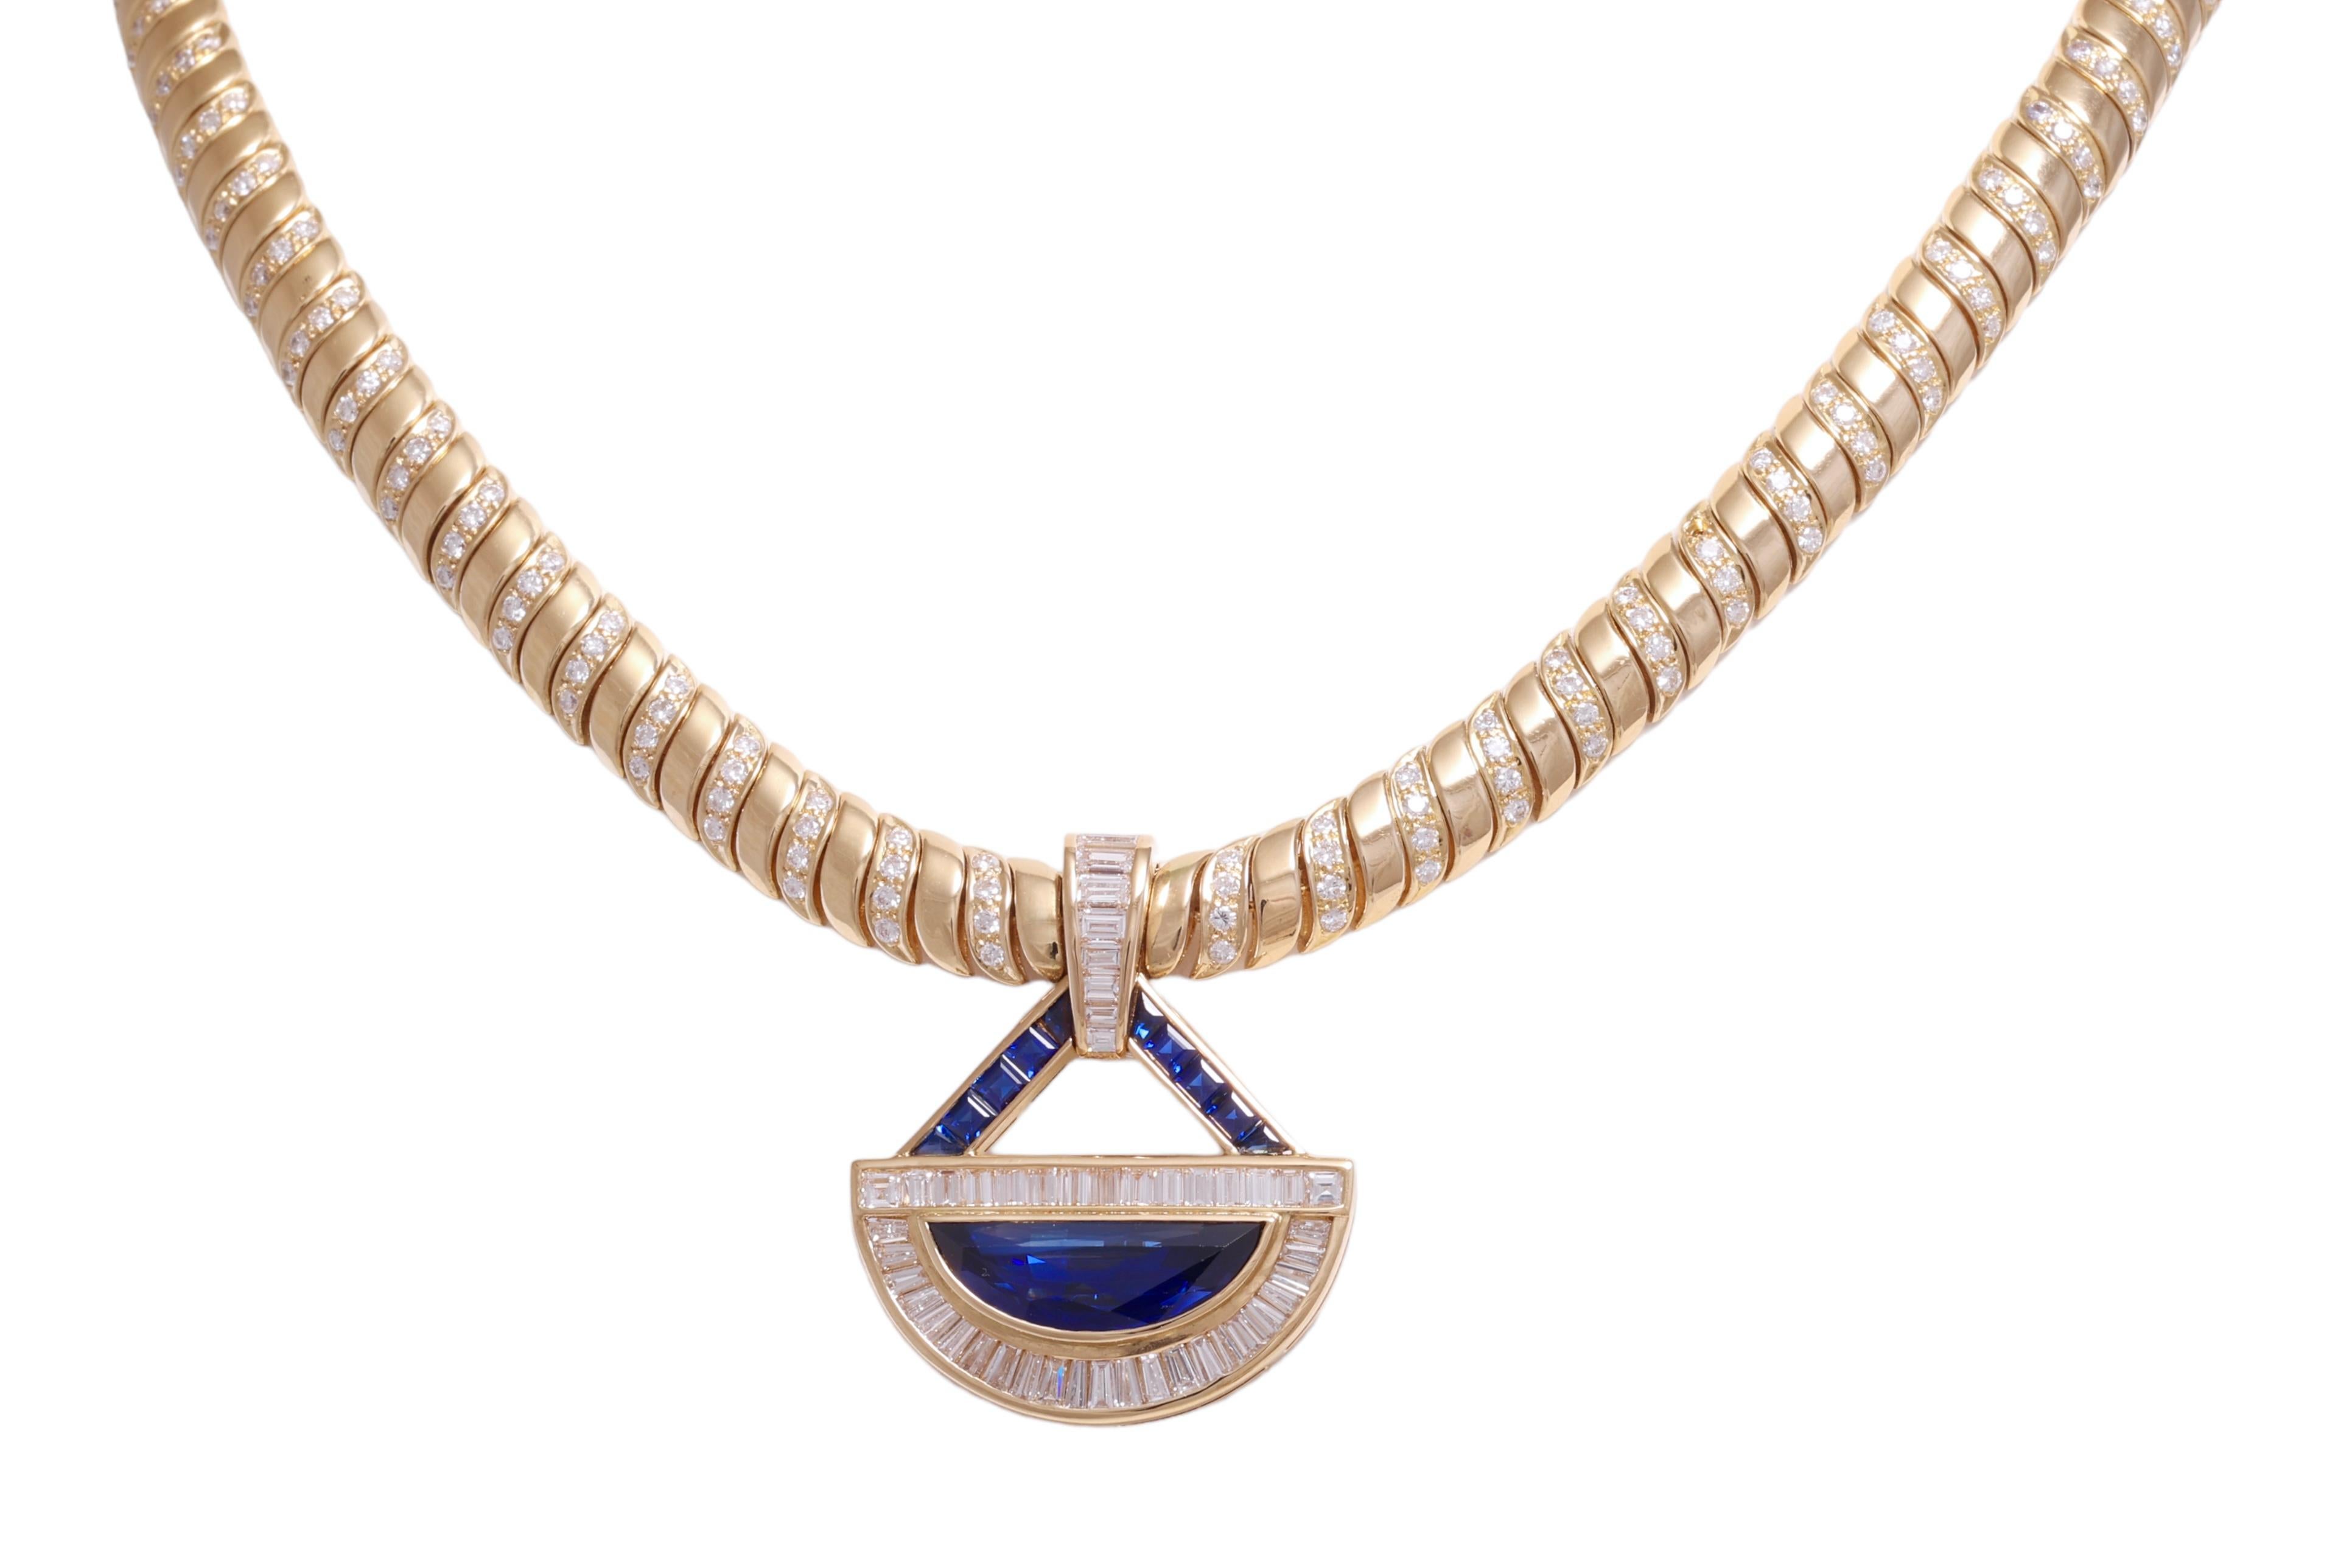 18 kt. Gold Adler Genèva Set Necklace & Ring Sapphire, Diamonds, Estate Sultan Oman Qaboos Bin Said

Necklace and Pendant can be separated, so that the pendant can be worn with a different necklace & necklace can be worn on it own to give it its